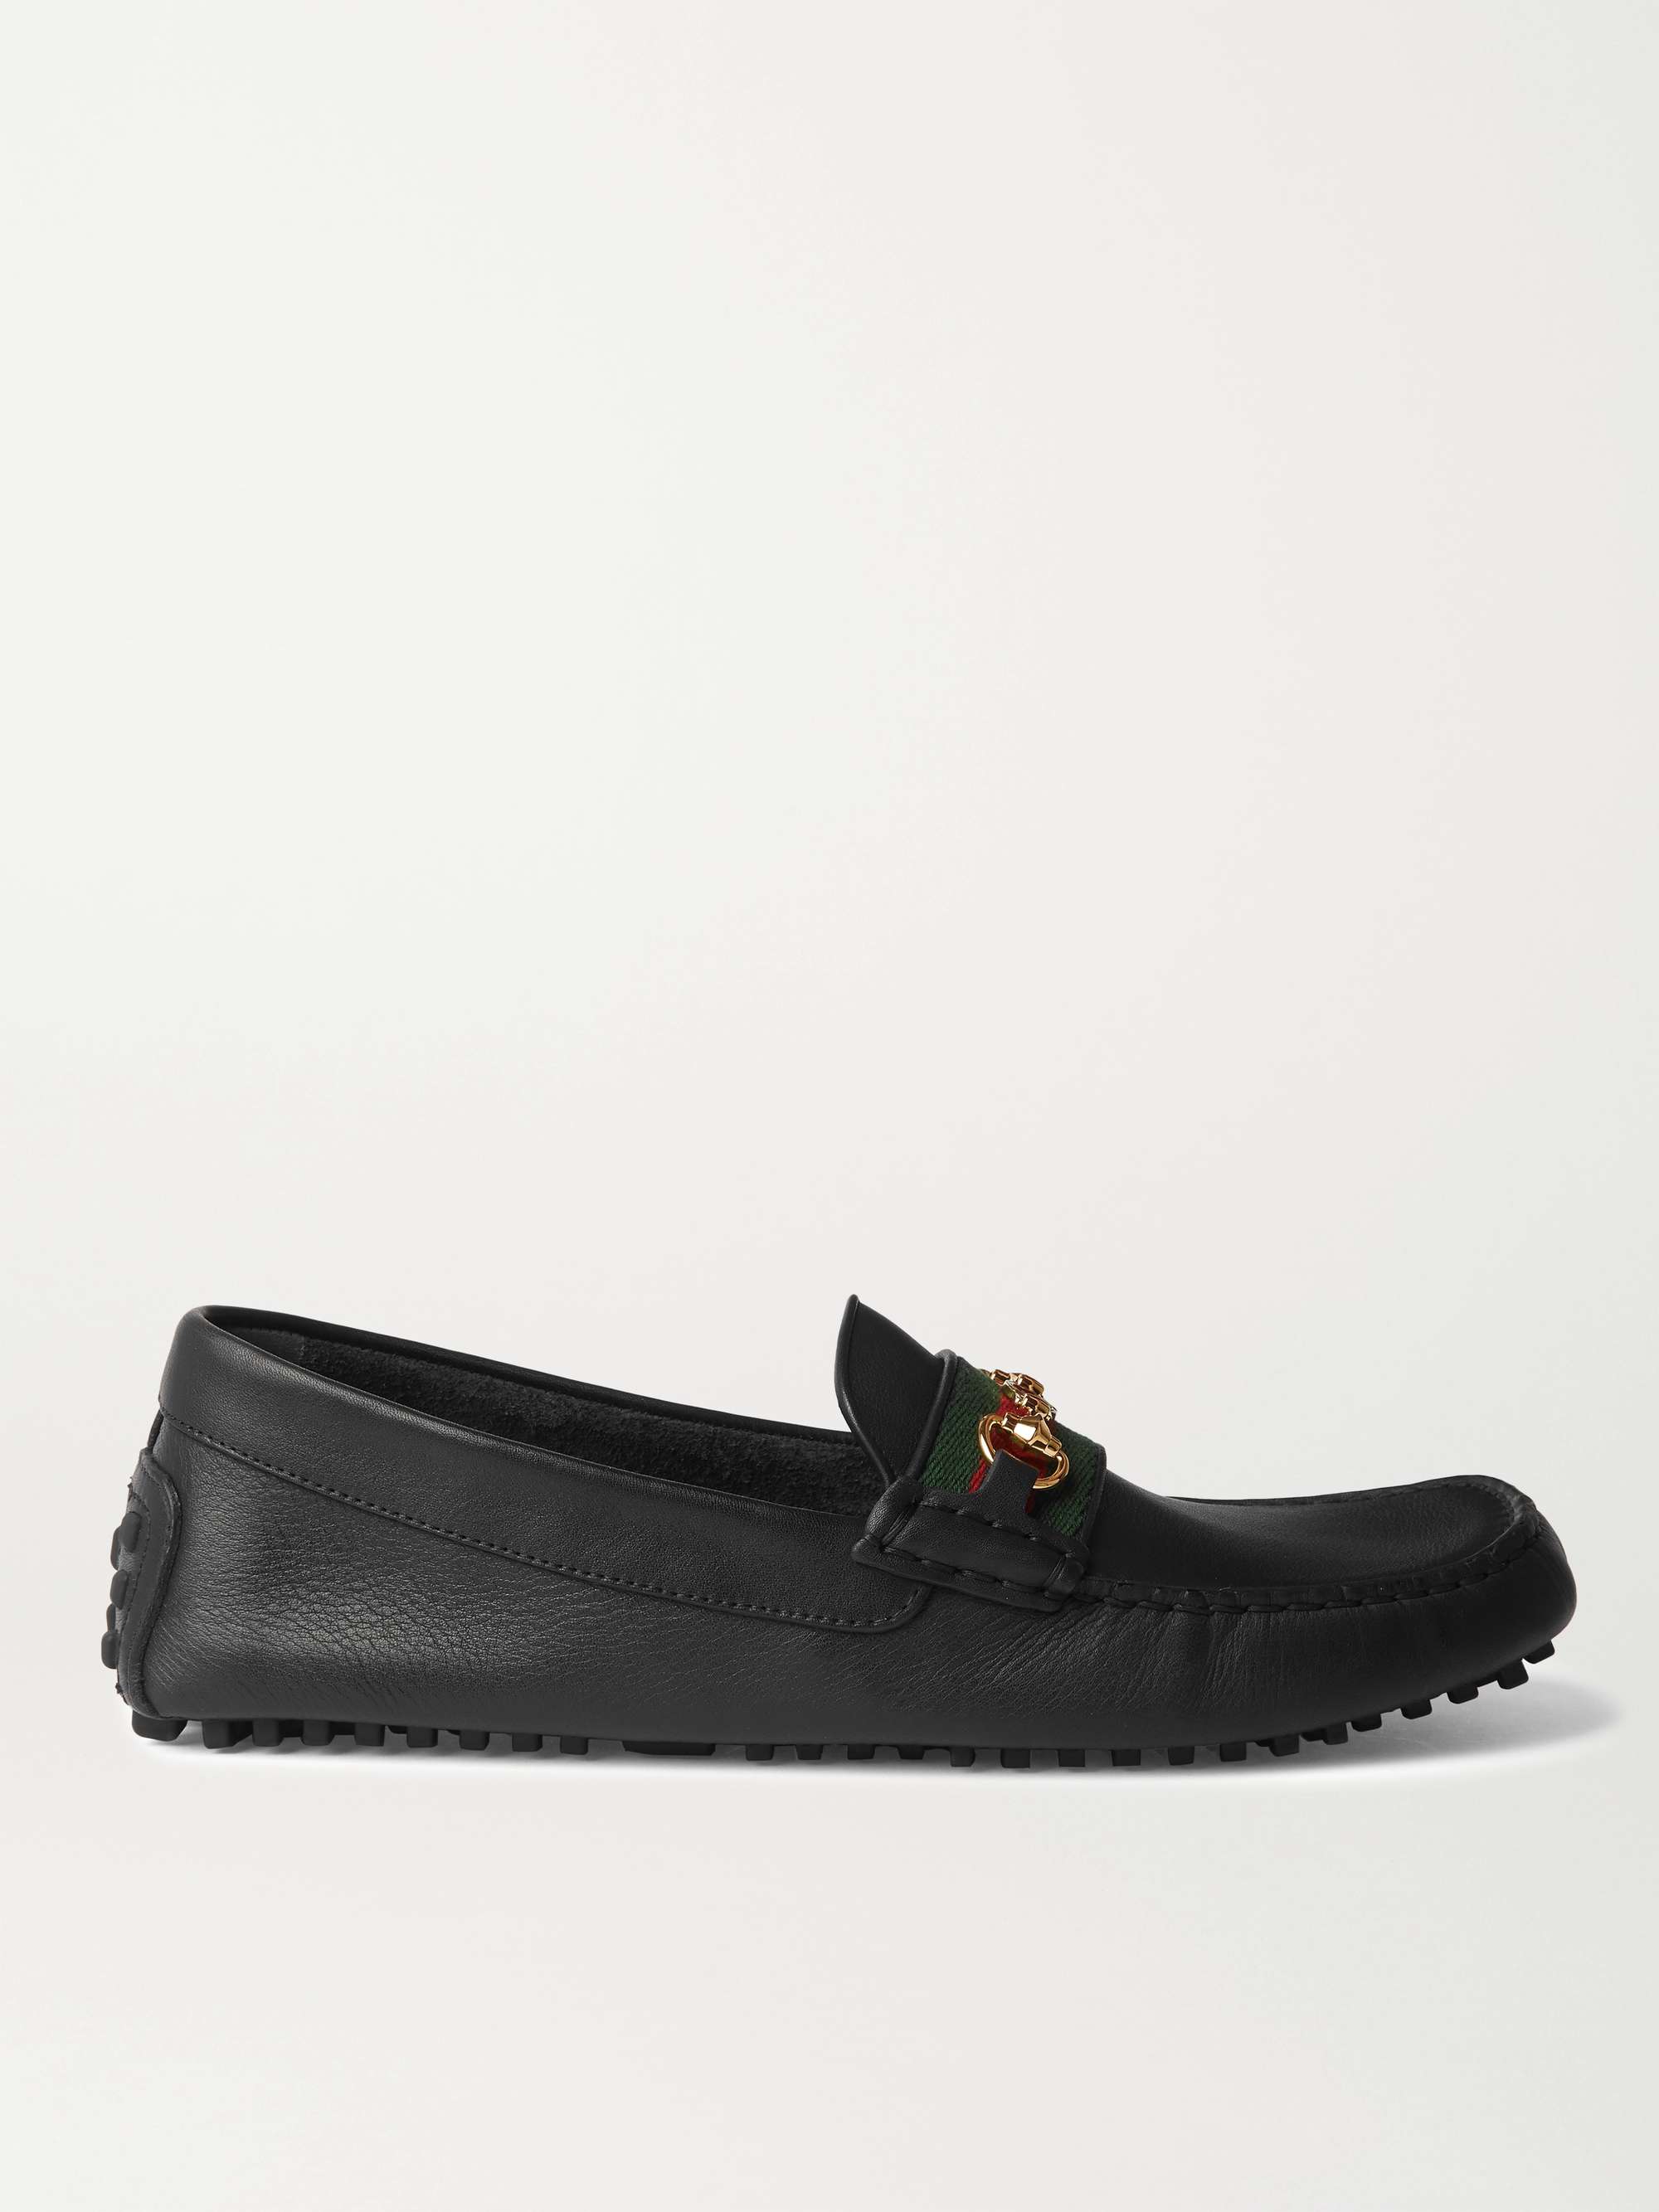 GUCCI Ayrton Webbing-Trimmed Horsebit Leather Driving Shoes